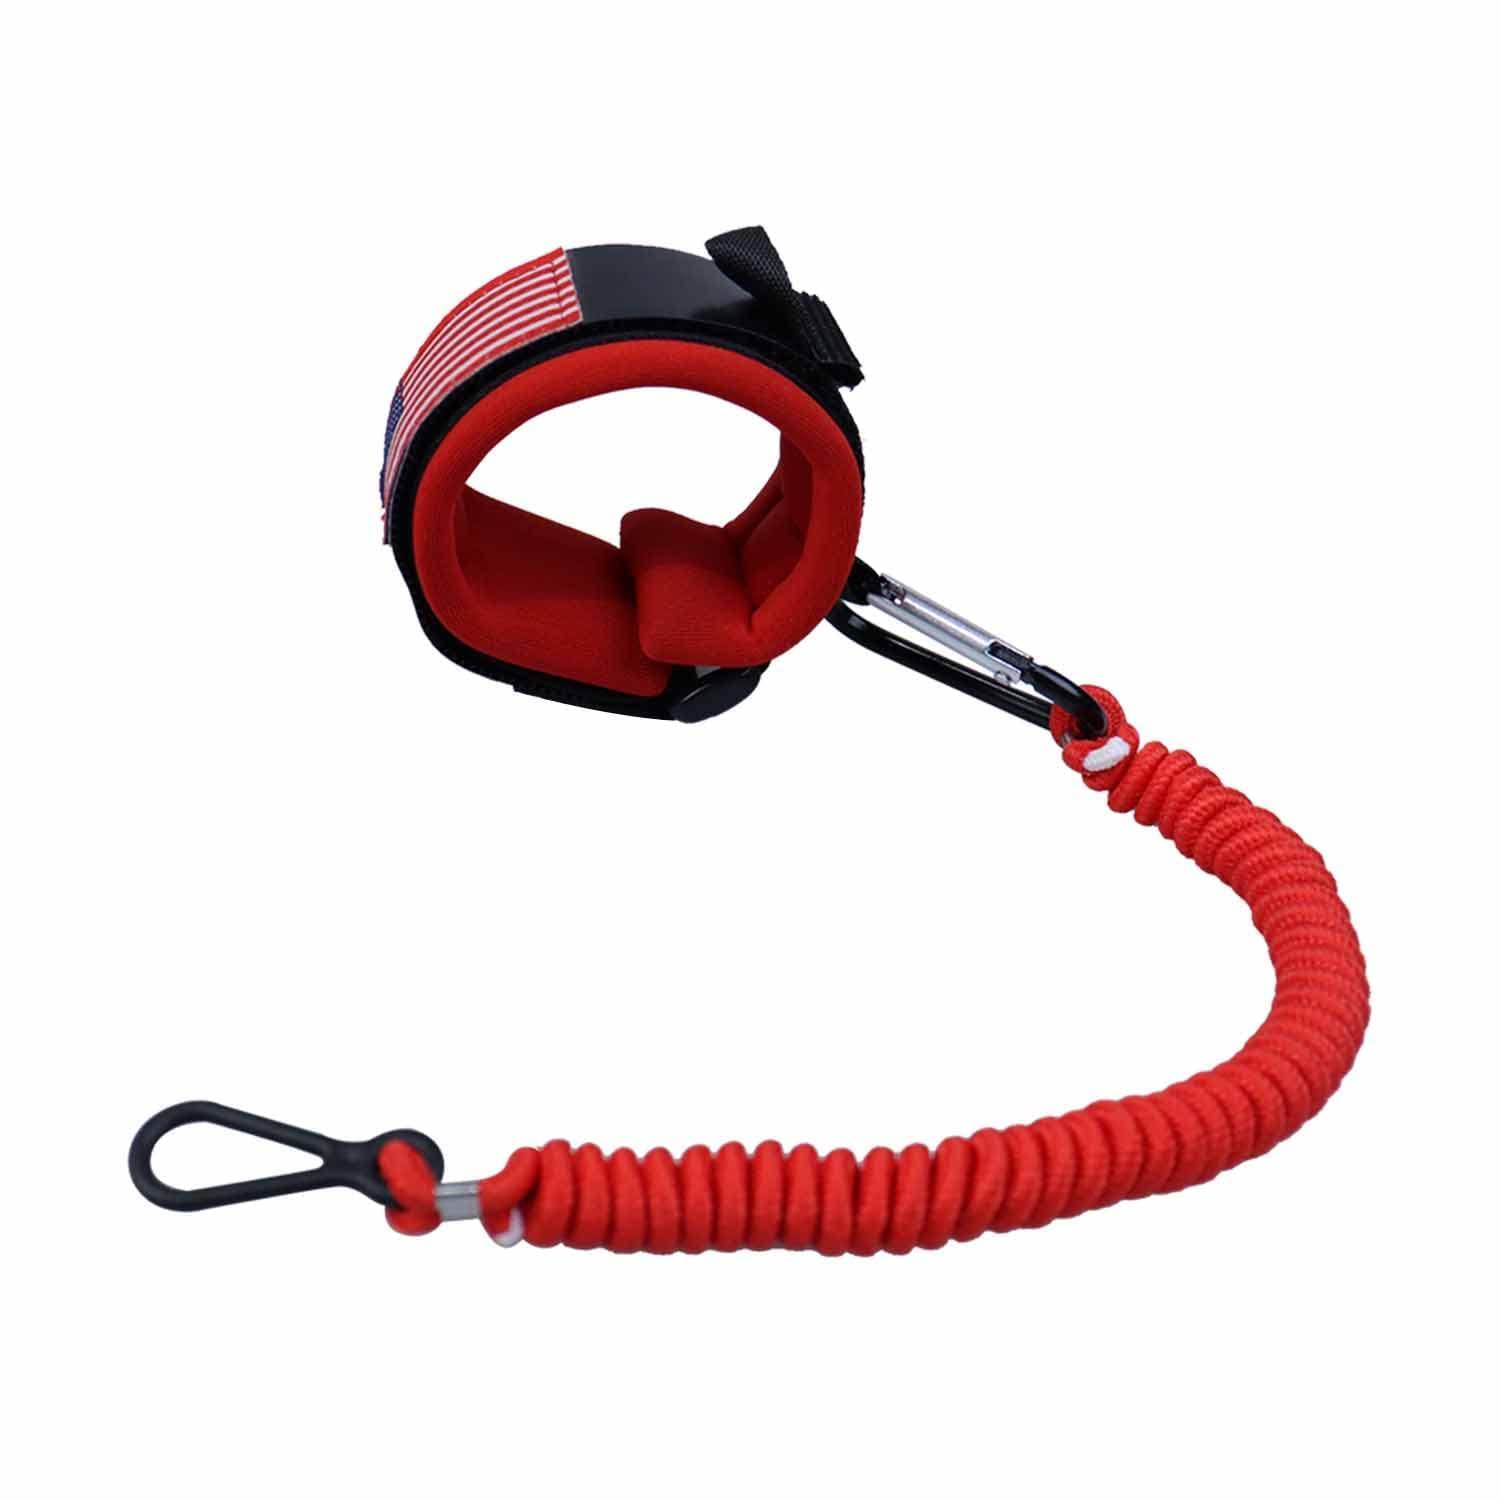 8M0092850 Boat Kill Switch Lanyard, Big Wrist Strap for Boat Outboard  Mercruiser Marine Replace 15920T54 15920A54, 54 Inch/137CM Long Boat Engine  Emergency Stop Switch Safety Lanyard Cord - Red